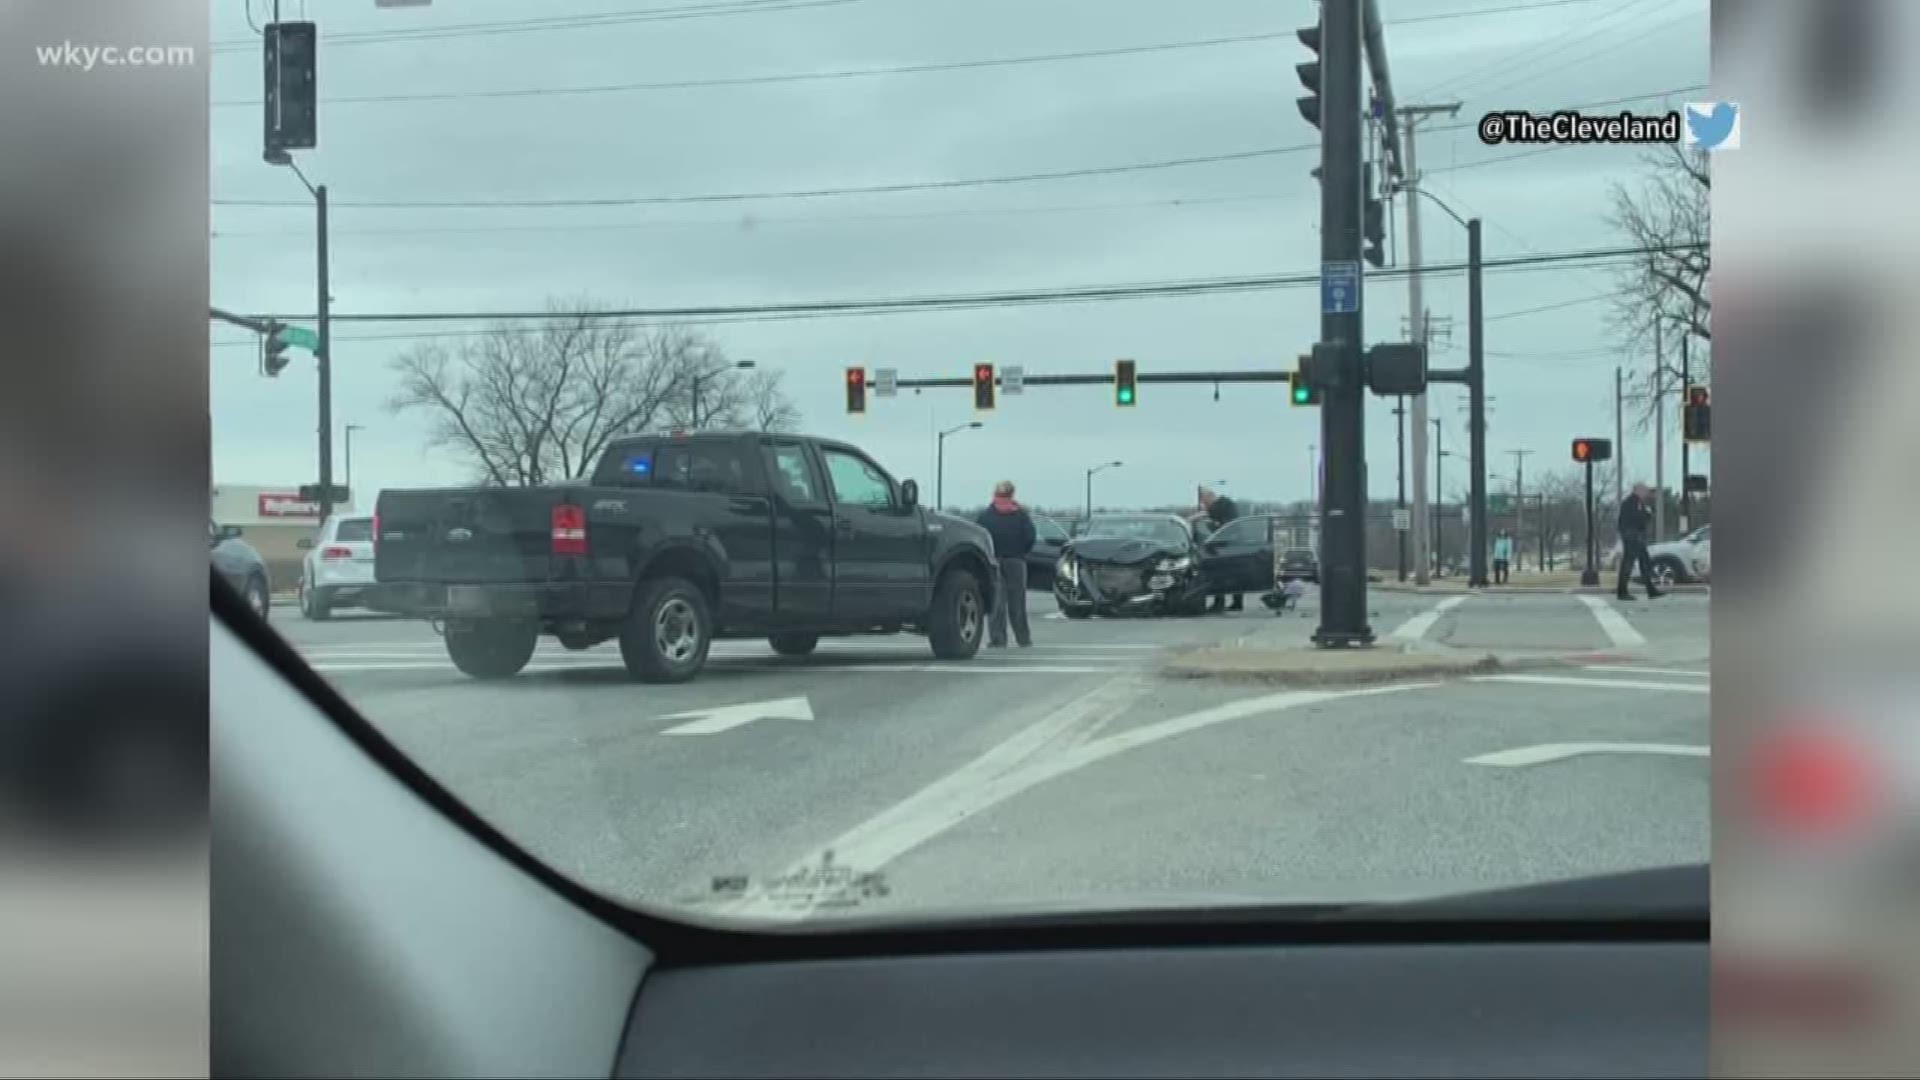 The incident occurred at the intersection of Detroit and Crocker Roads.